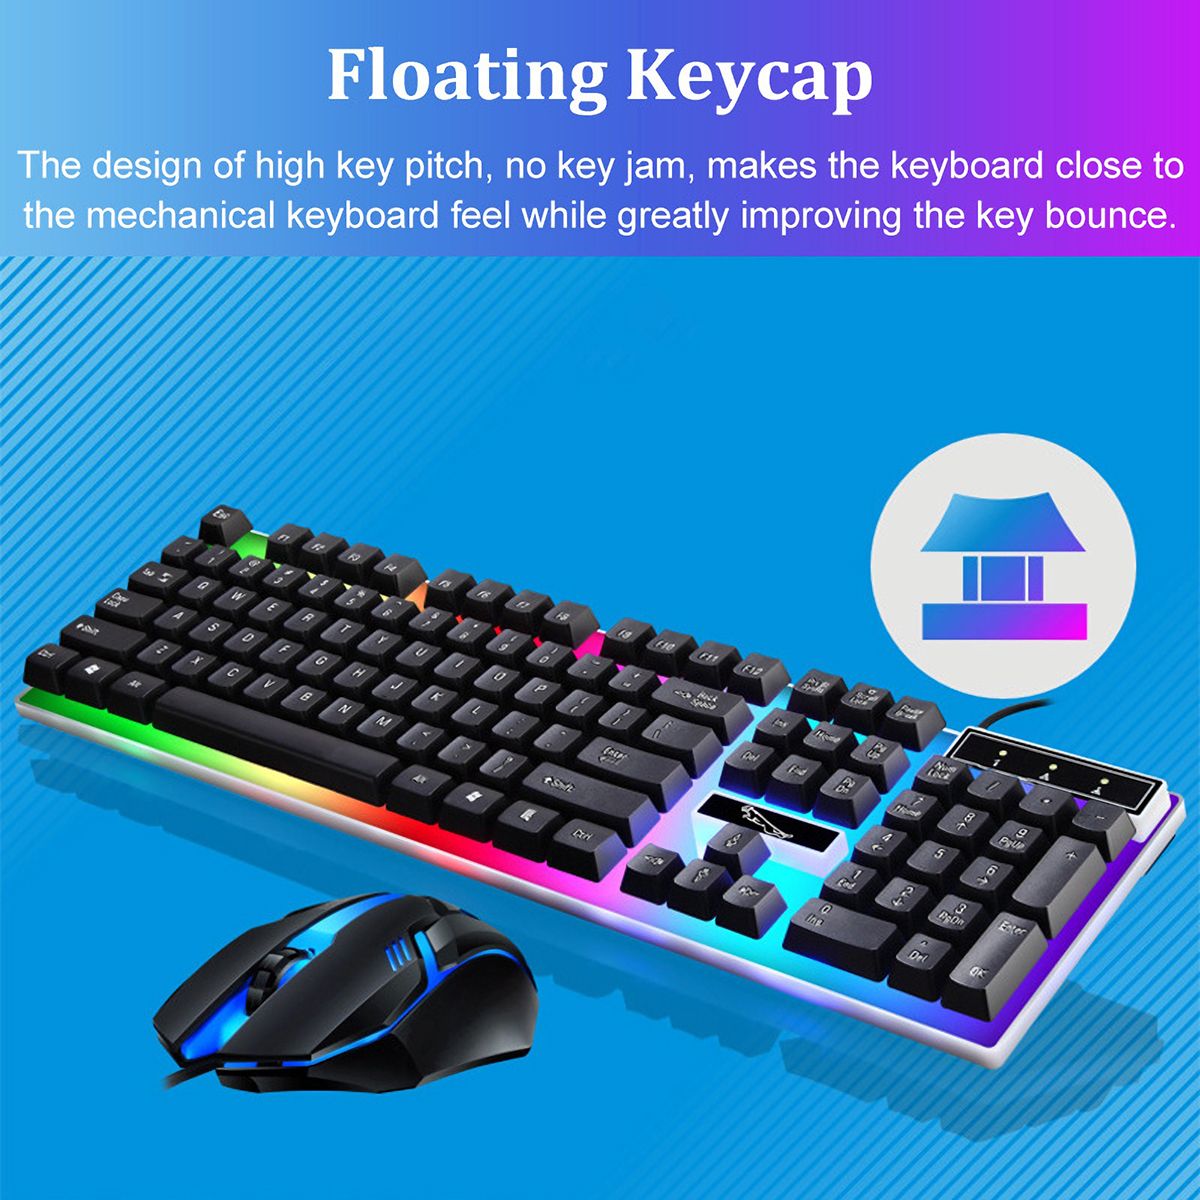 G21B-104-Keys-USB-Wired-Gaming-Keyboard-Mouse-Set-Rainbow-LED-Rainbow-Color-Backlight-for-PC-Laptop--1739319